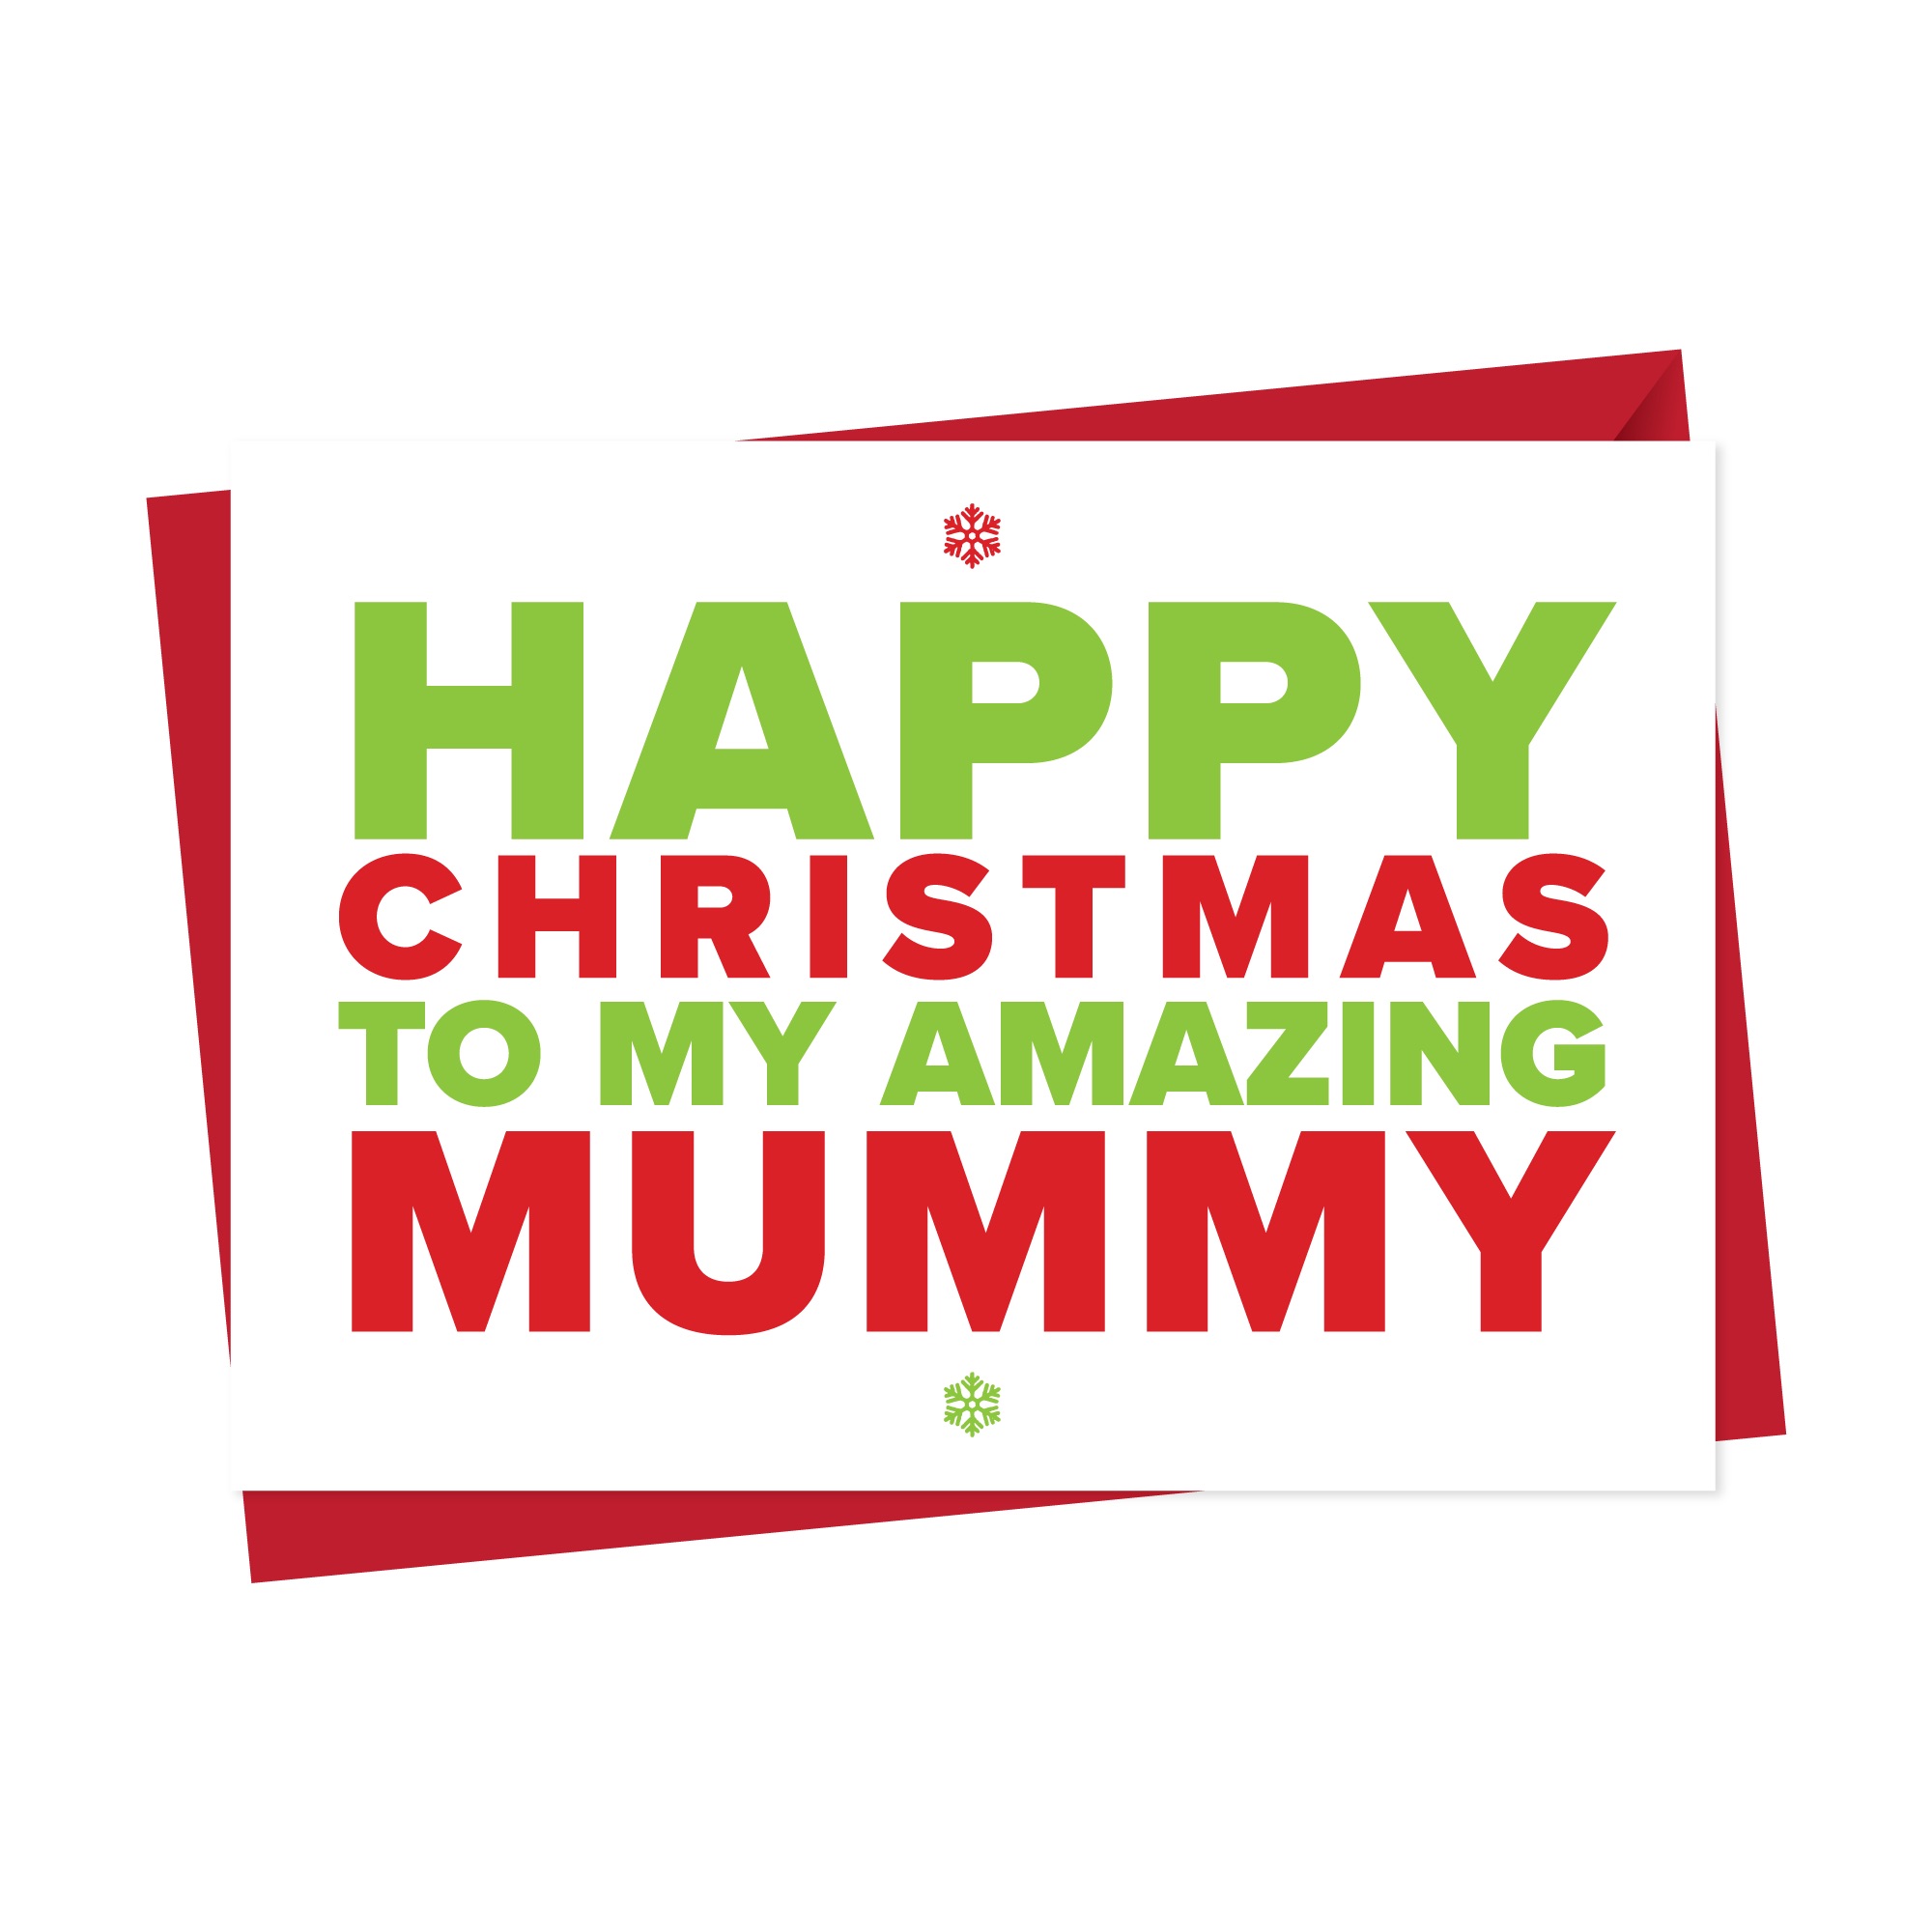 Christmas Card for An Amazing Mum/Mummy/Mother